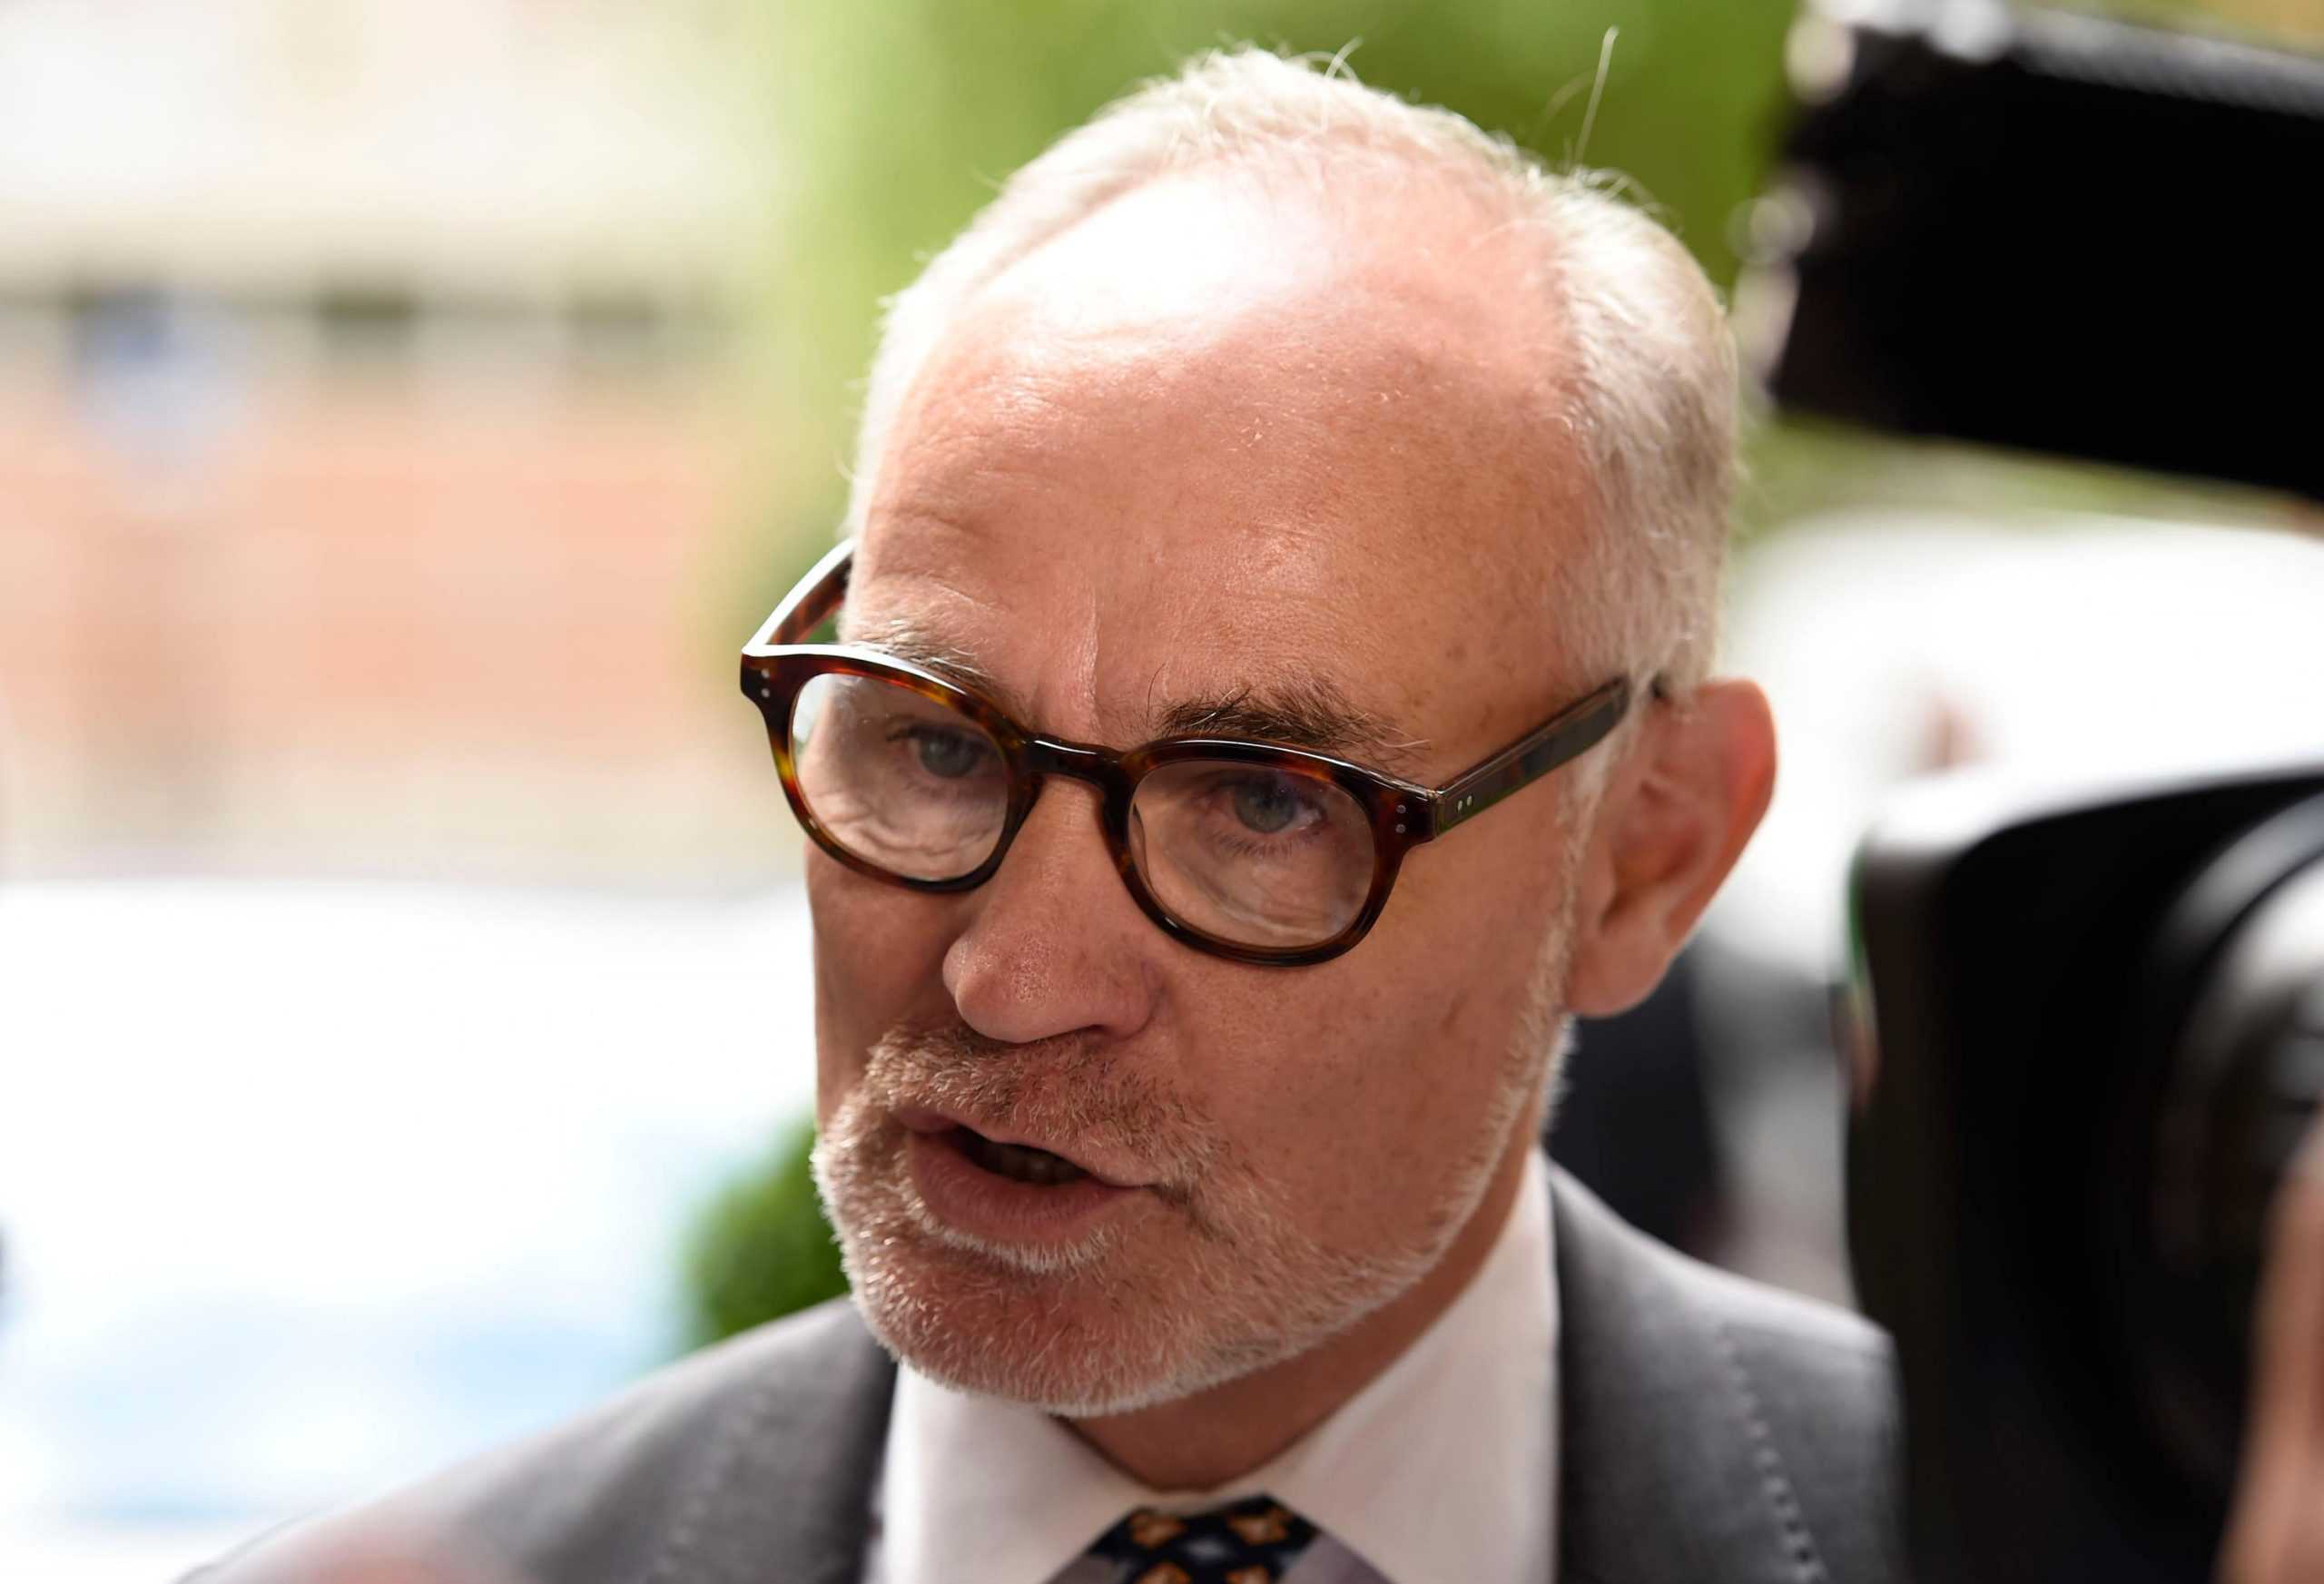 ‘Absolute horror show’: Tory MP Crispin Blunt defends convicted Khan